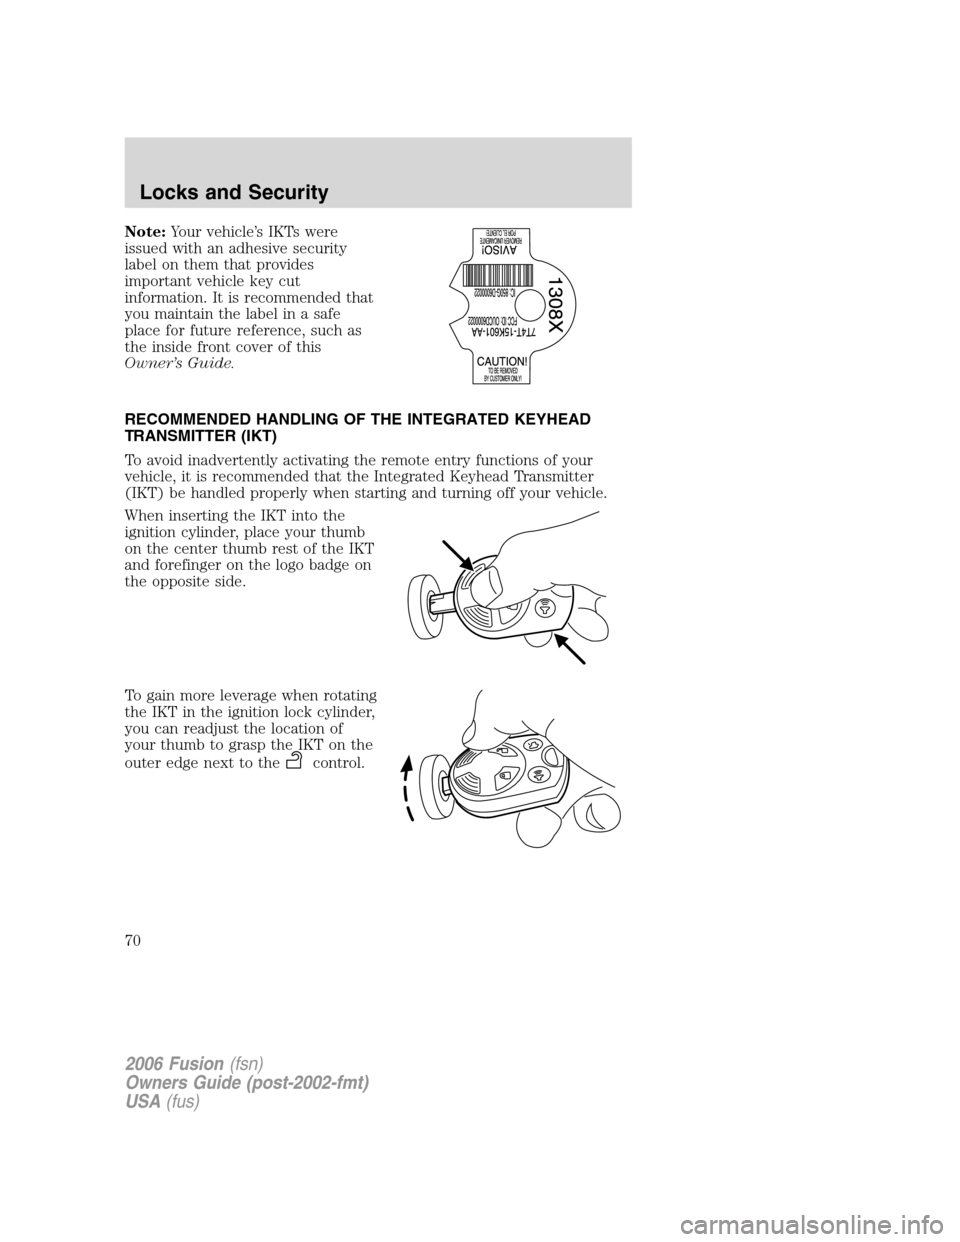 FORD FUSION (AMERICAS) 2006 1.G Owners Manual Note:Your vehicle’s IKTs were
issued with an adhesive security
label on them that provides
important vehicle key cut
information. It is recommended that
you maintain the label in a safe
place for fu